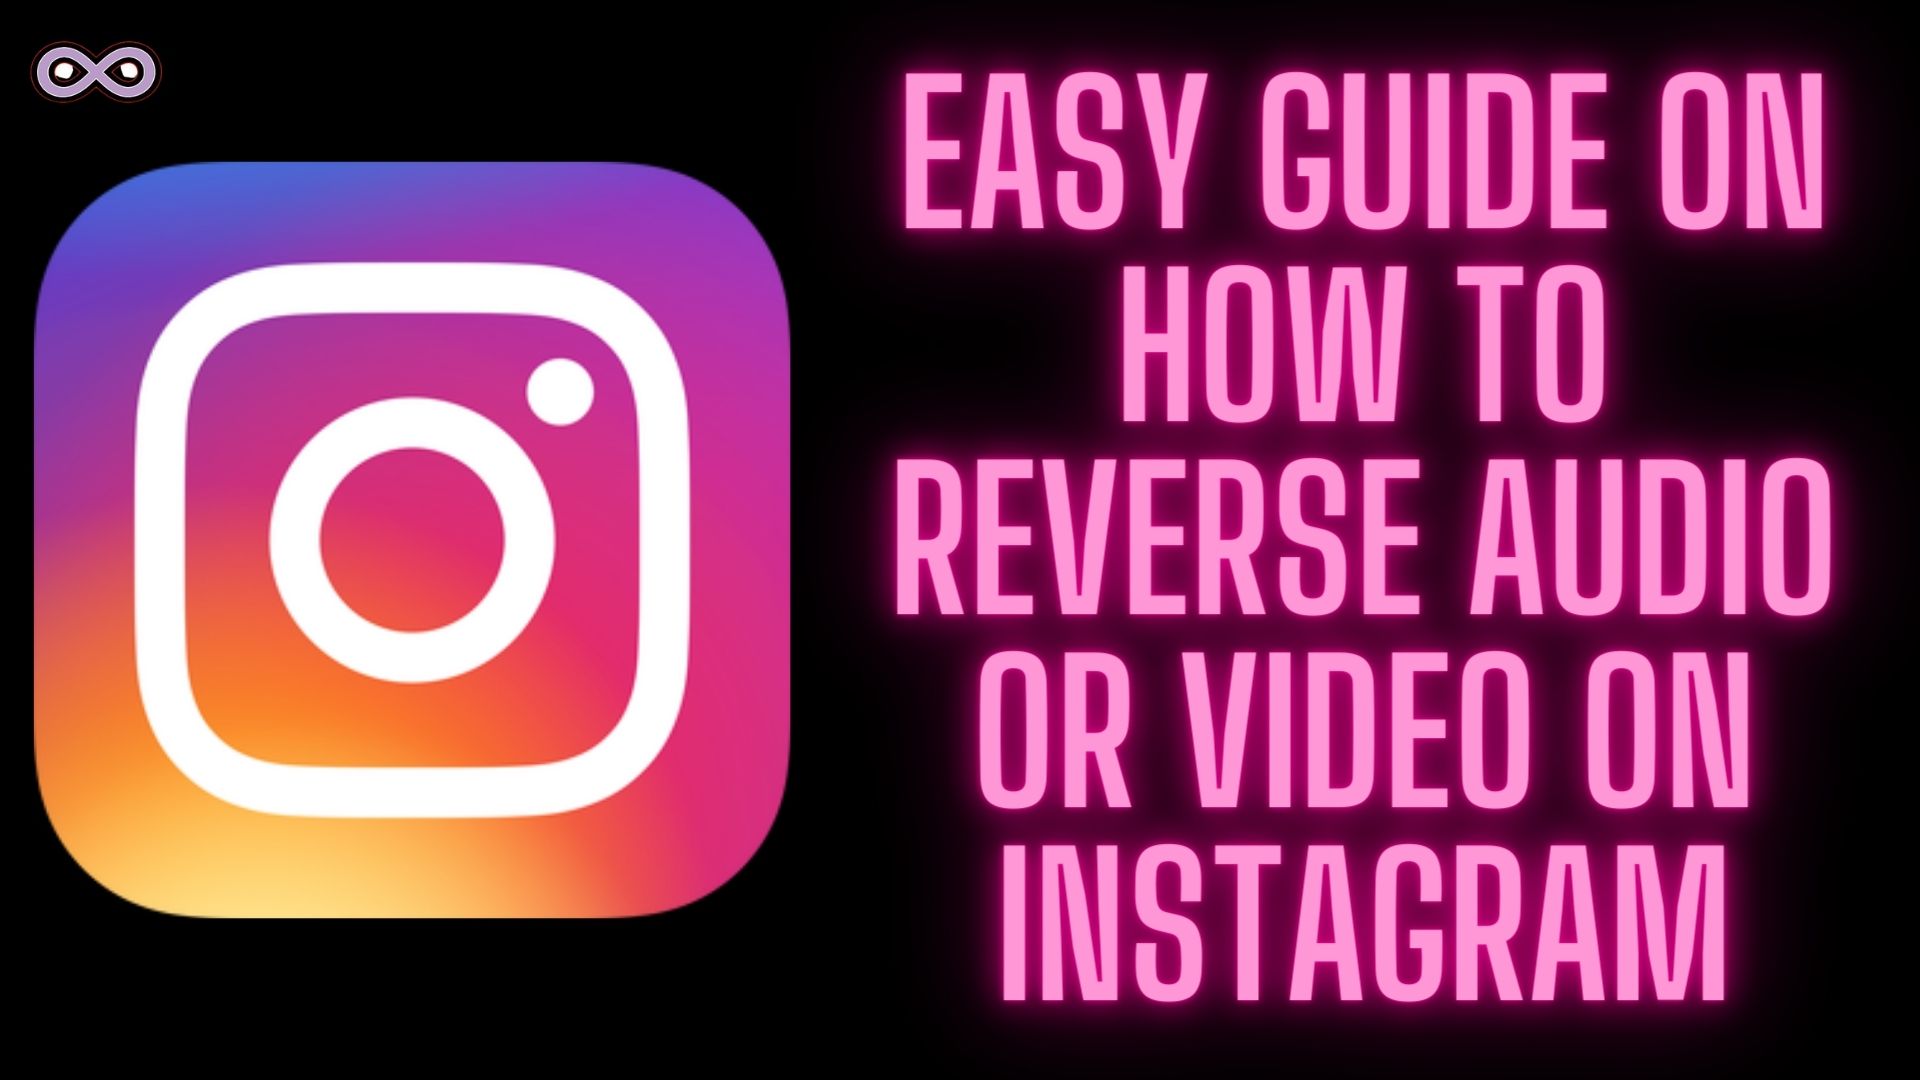 Easy Guide on How to Reverse Audio on Instagram - Aspartin